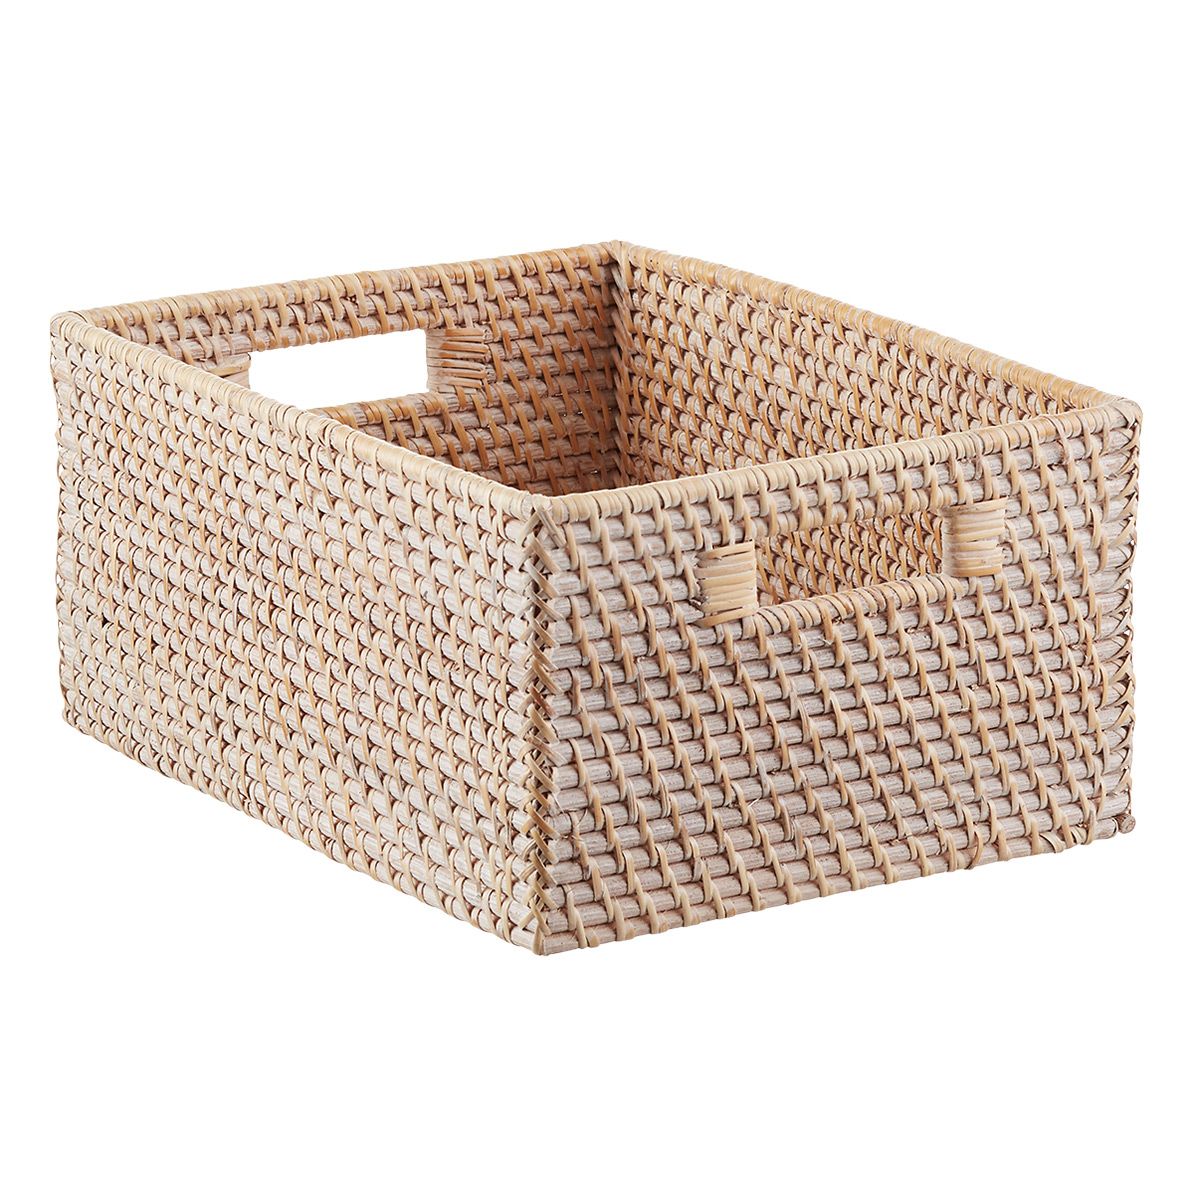 Large Rattan Bin w/ Handles Whitewash | The Container Store